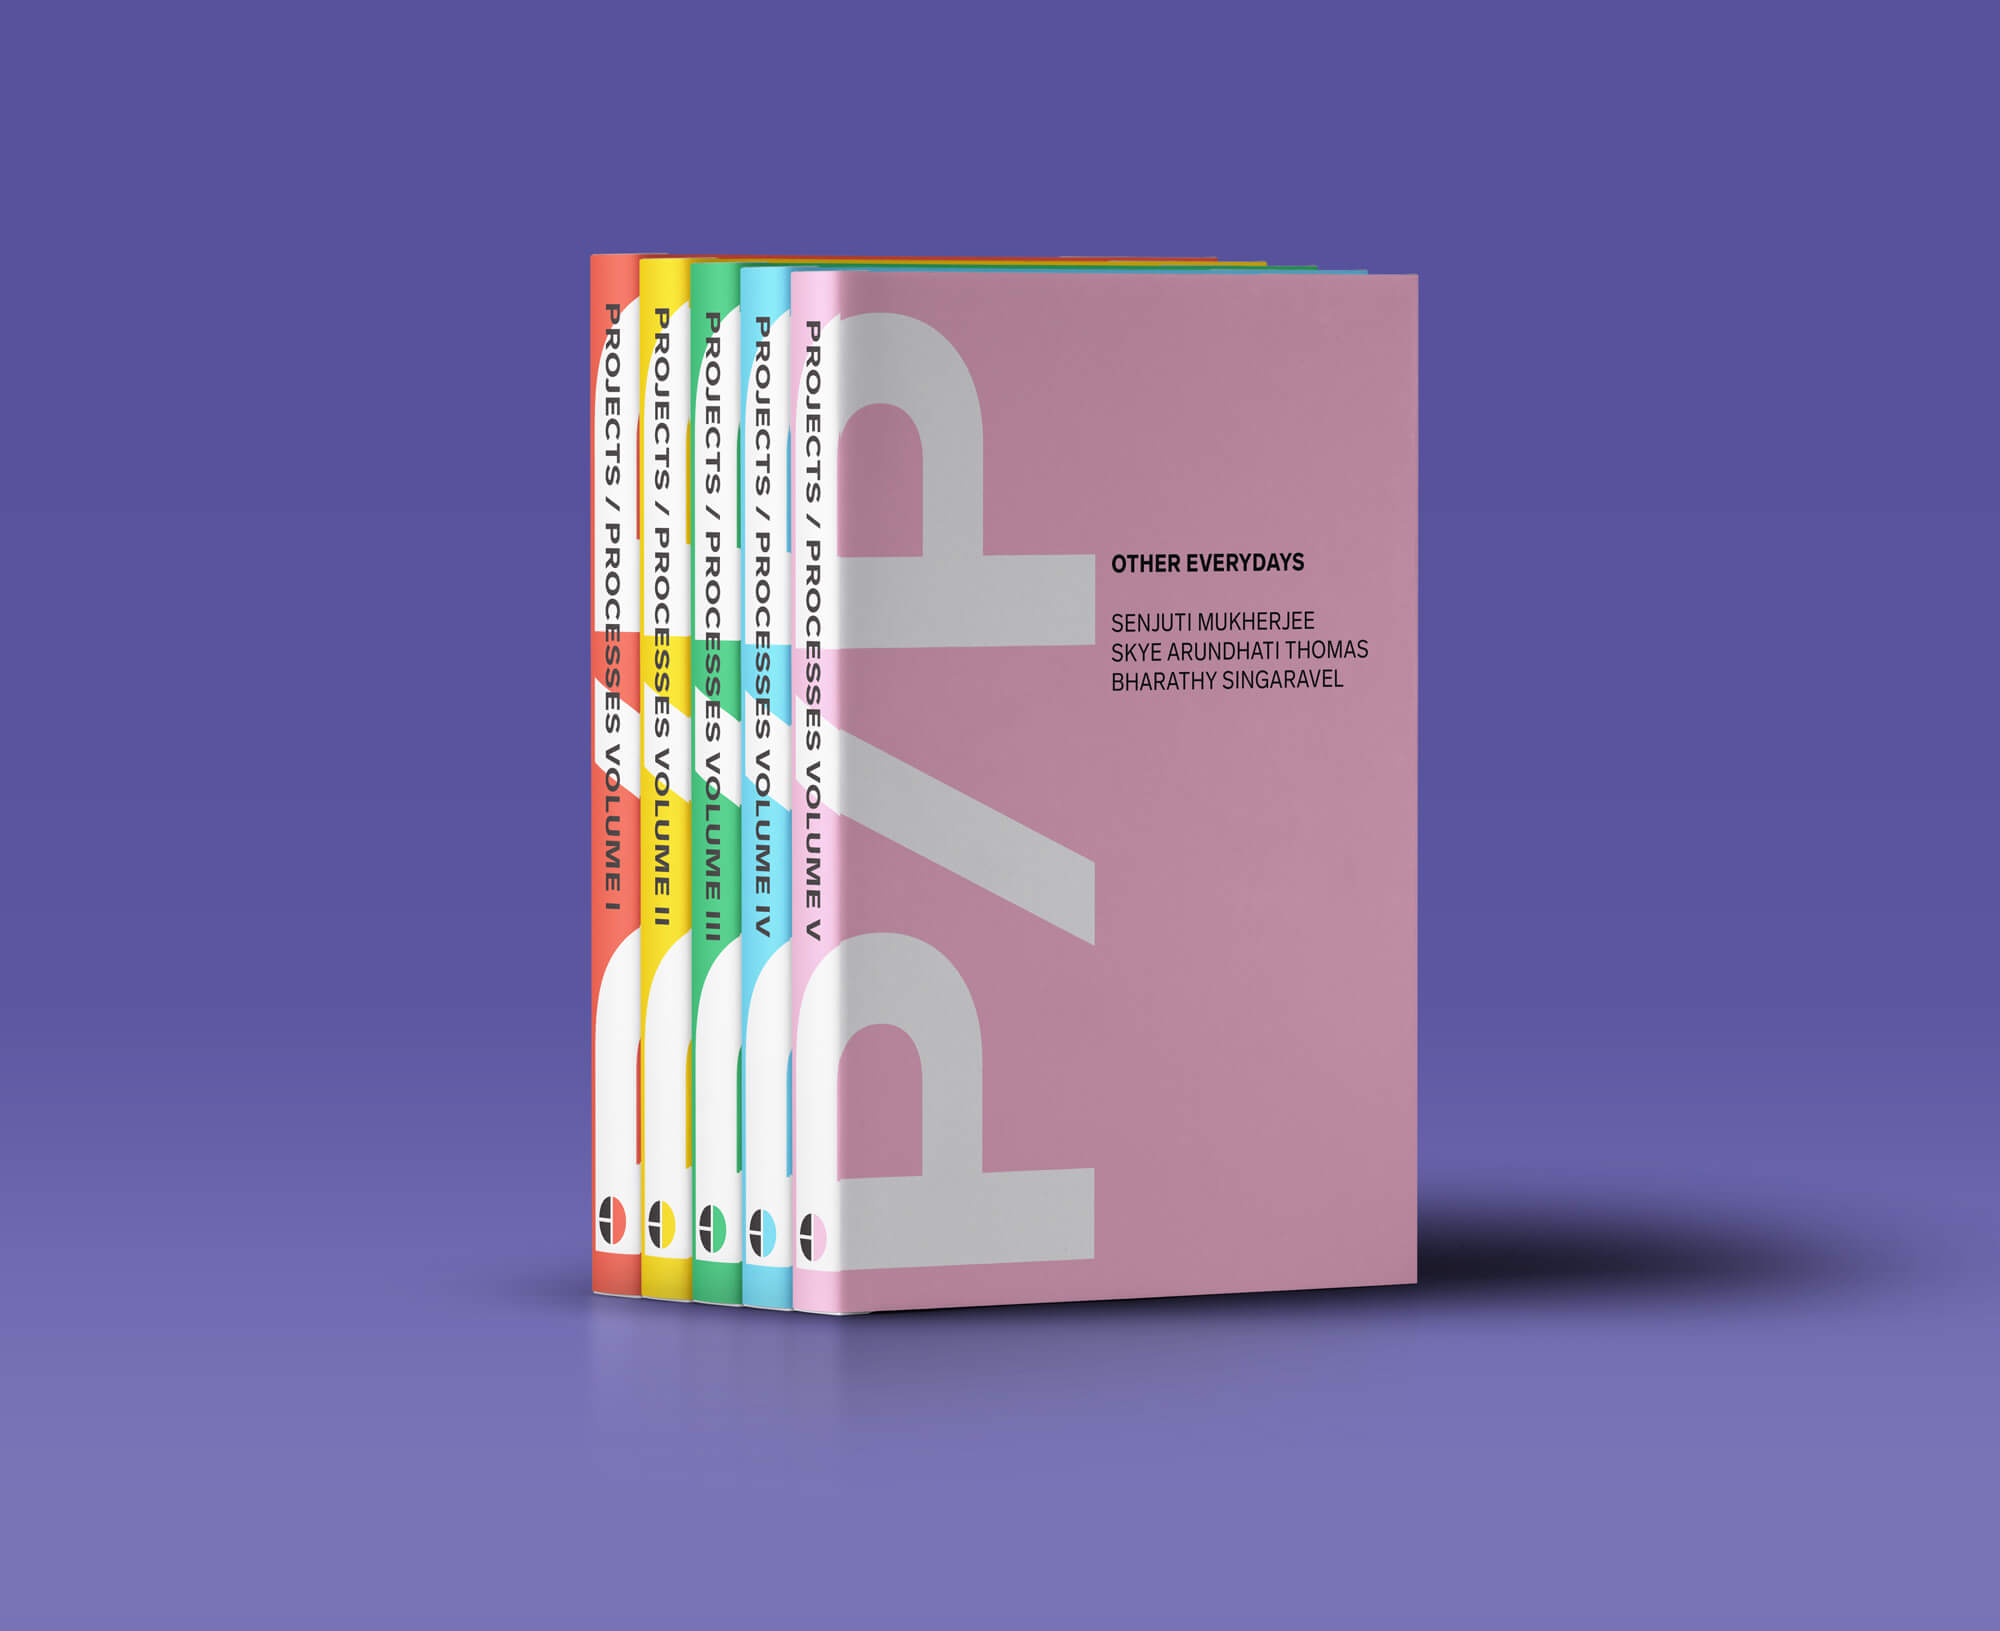 Photo of a complete set of the 2019 edition of Projects/Processes